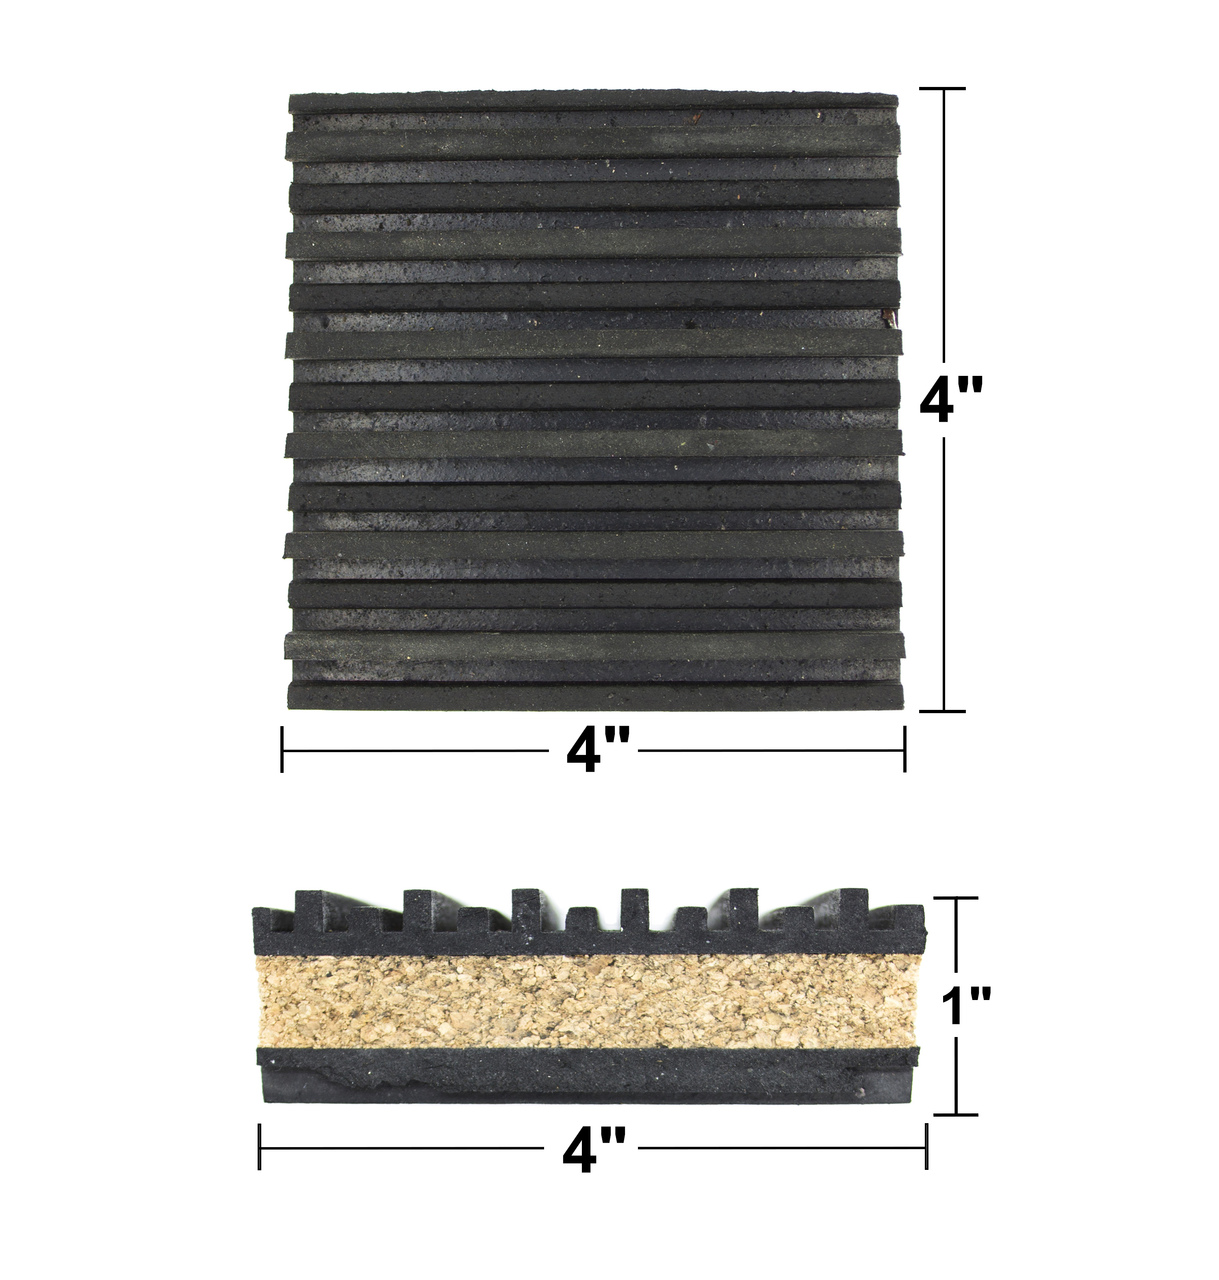 6MM ANTI VIBRATION RUBBER CORK PAD SHEET OIL AND FUEL RESISTANT VARIOUS SIZES 